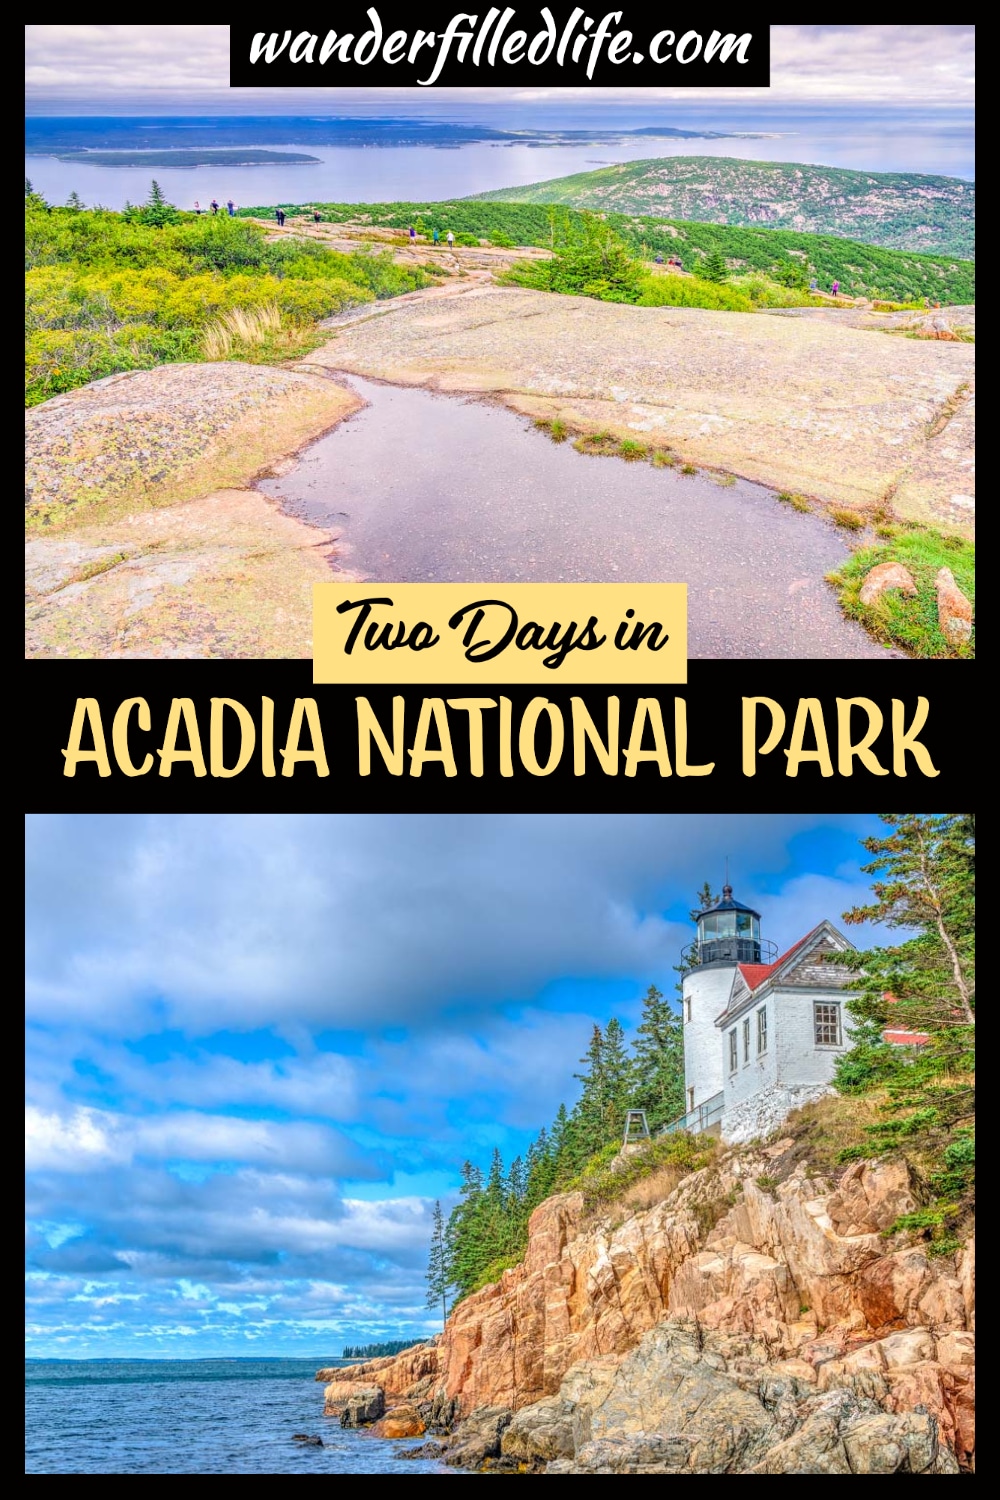 With two days in Acadia National Park, you can enjoy the rugged coast, mountain summits, and a walk on the historic carriage roads.